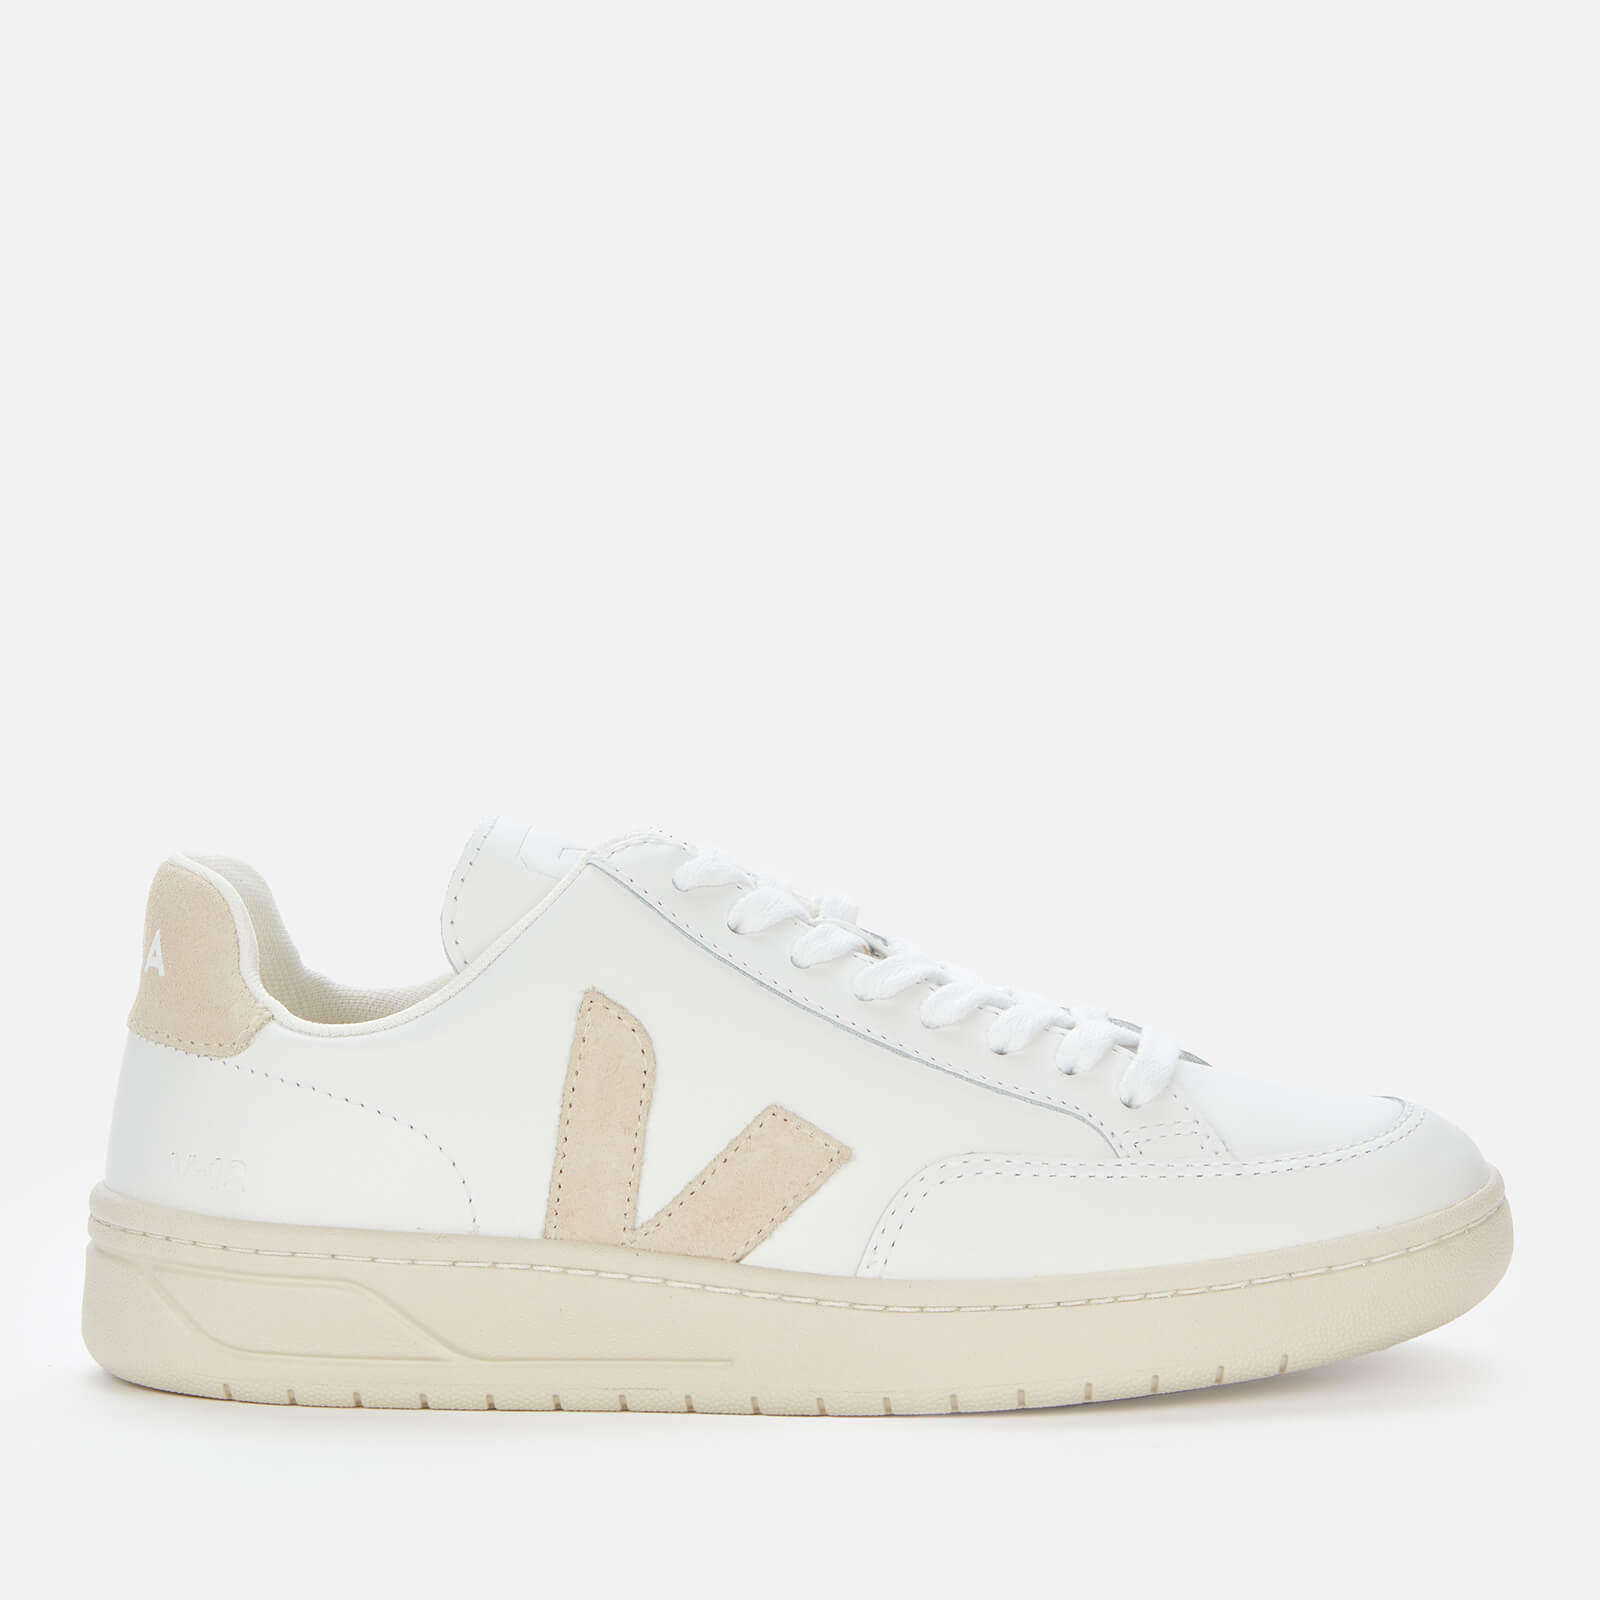 Veja Women's V-12 Leather Trainers - Extra White/Sable - UK 5